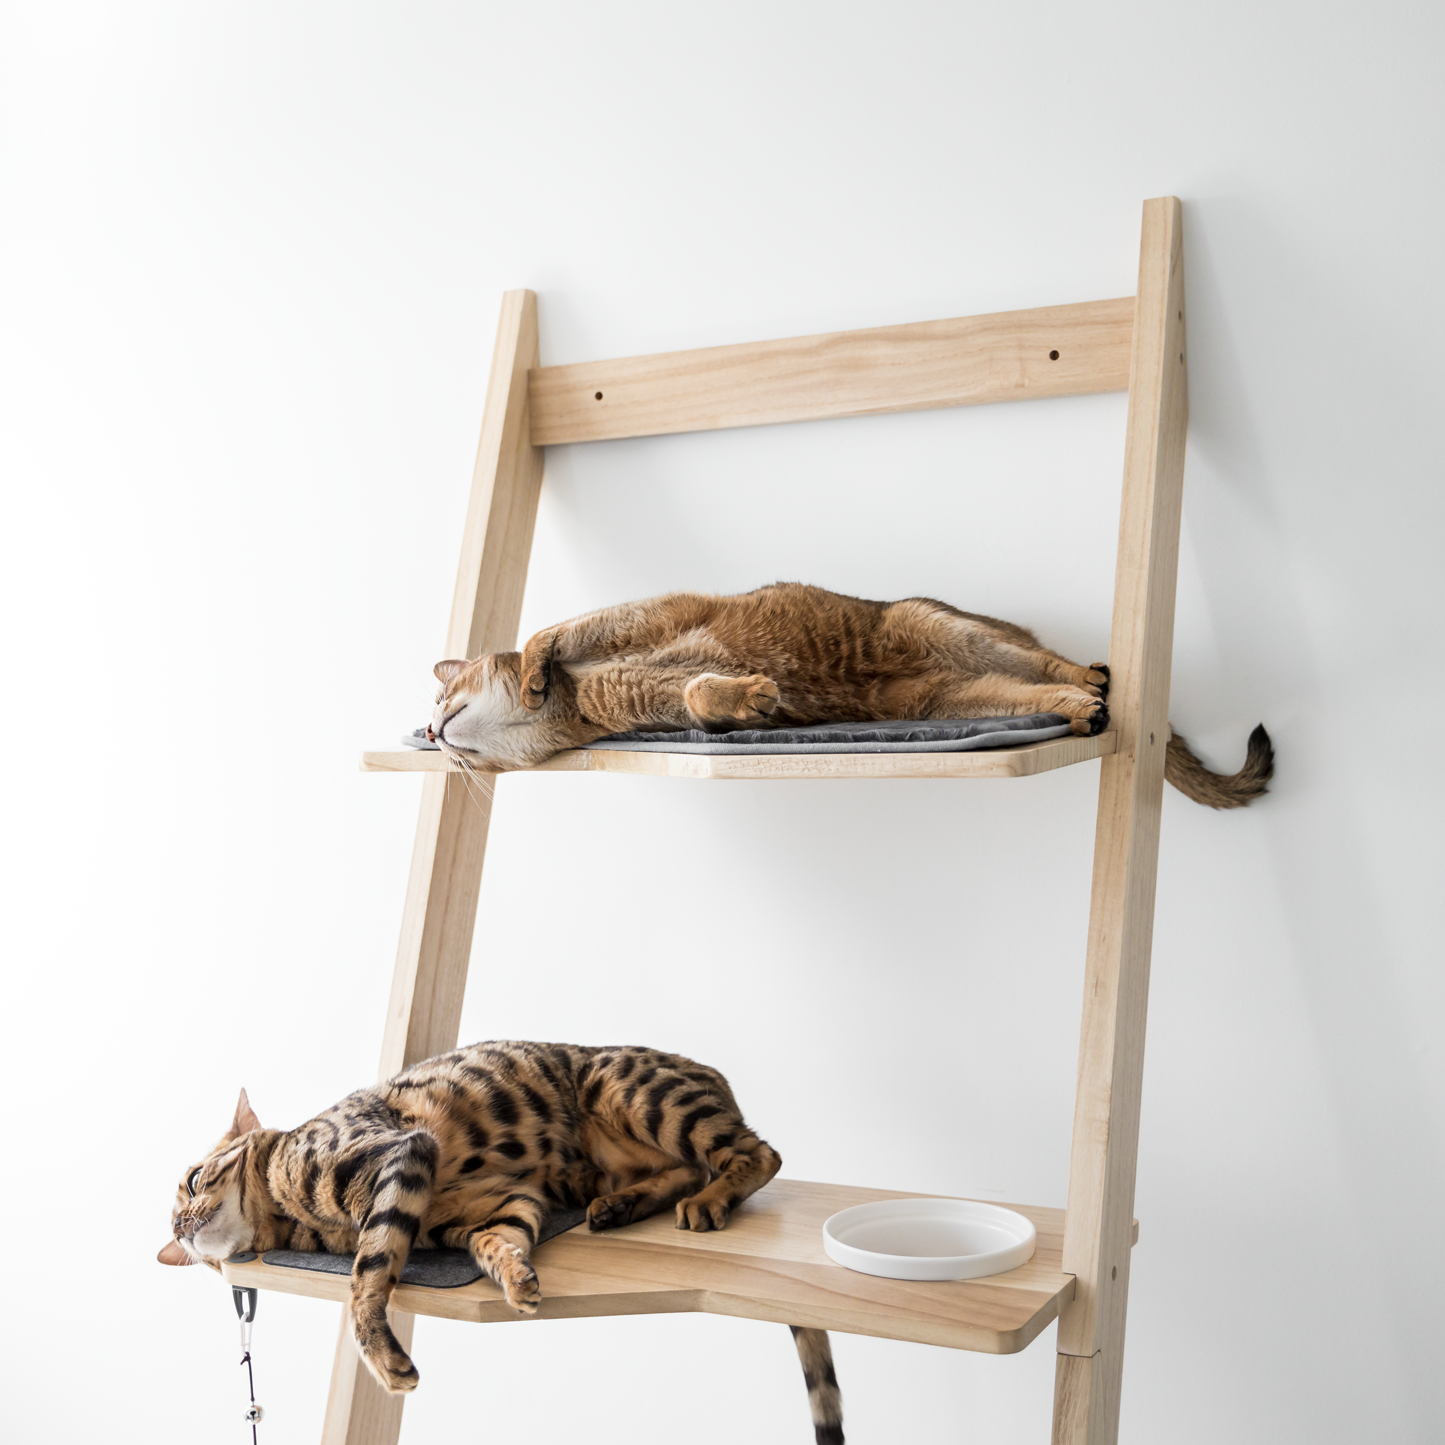 multi-story modern cat tree with accessories, beige wood